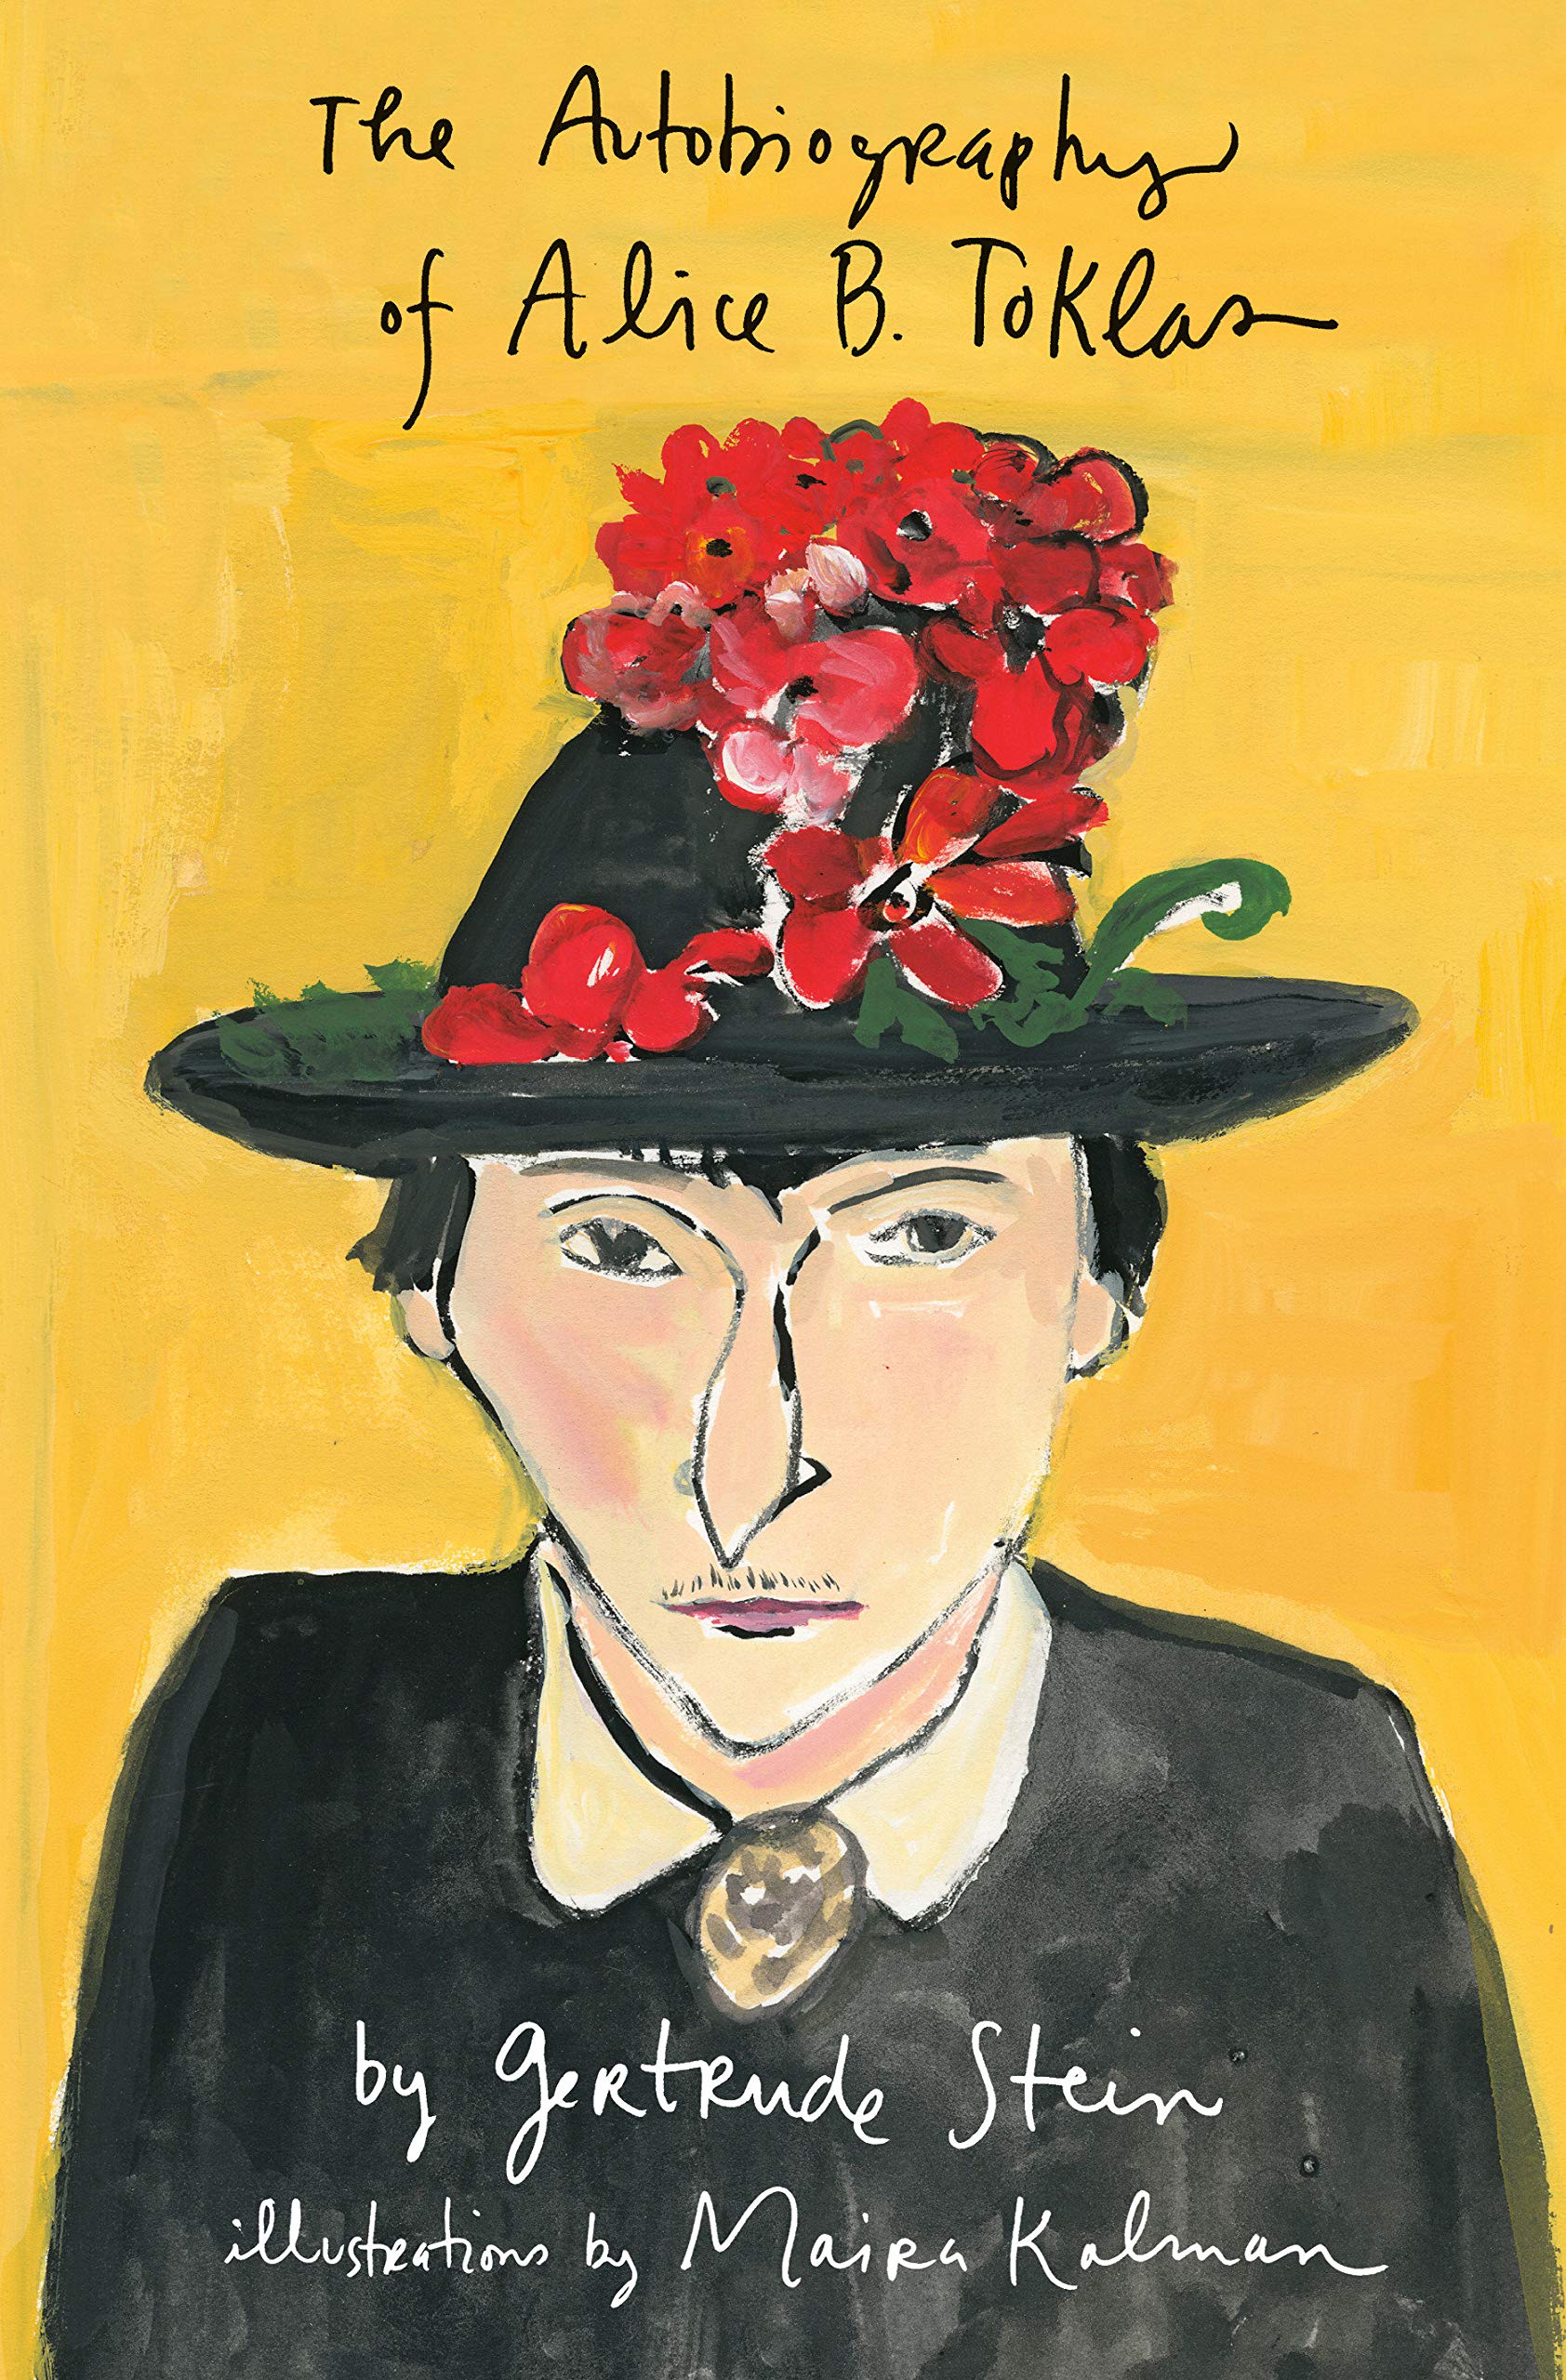 Gertrude Stein: The Autobiography of Alice B. Toklas Illustrated (Hardcover, 2020, Penguin)